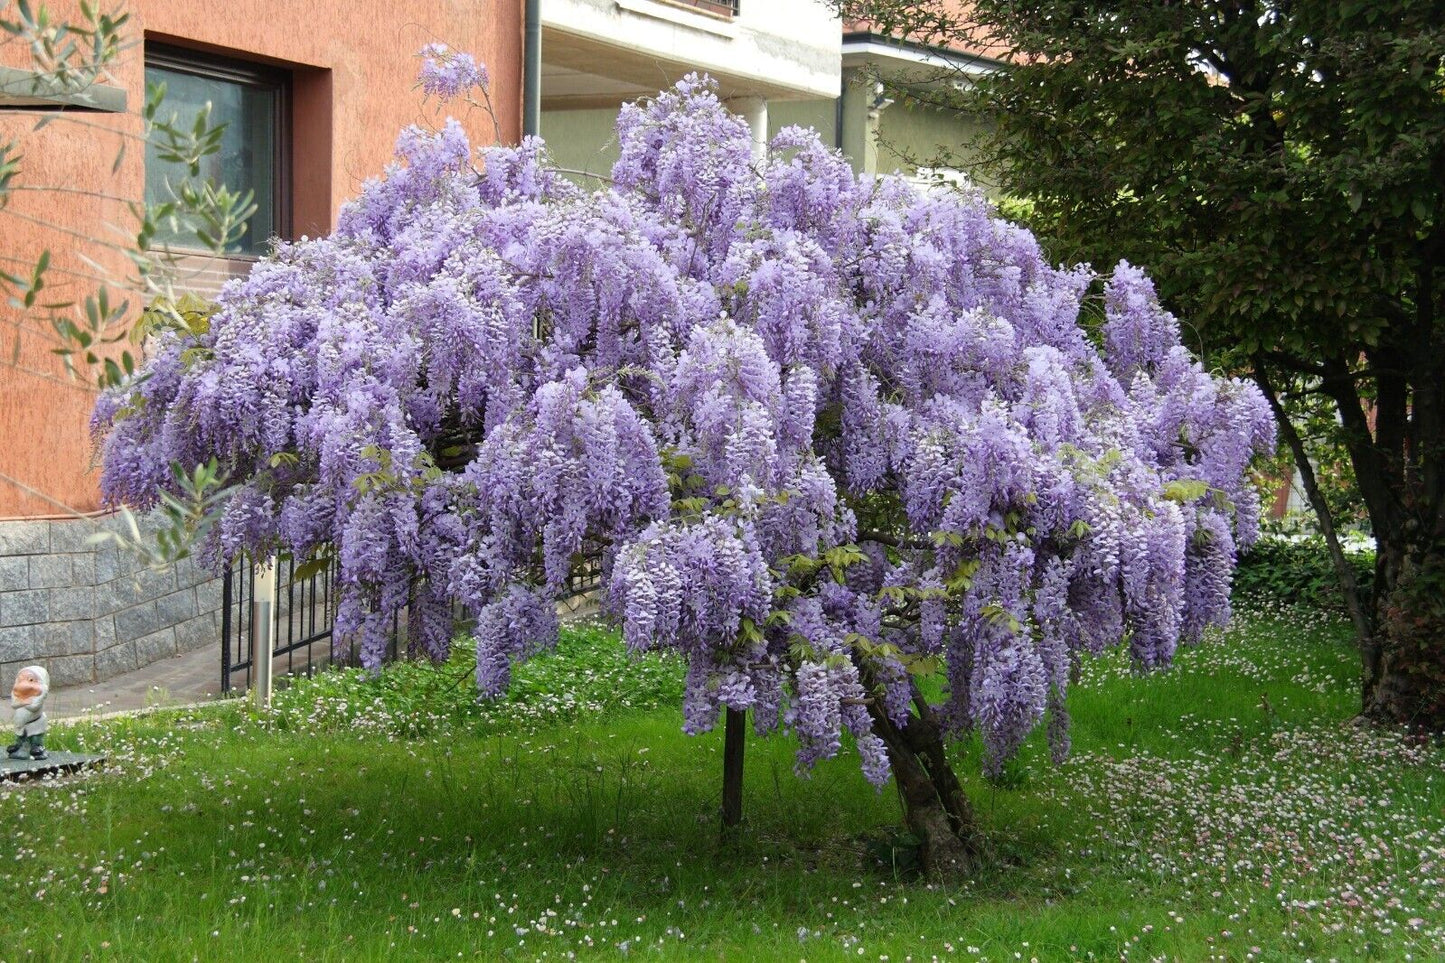 20 African Wisteria Tree Seeds, Bolusanthus speciosus Seeds, Tree Wisteria Seeds